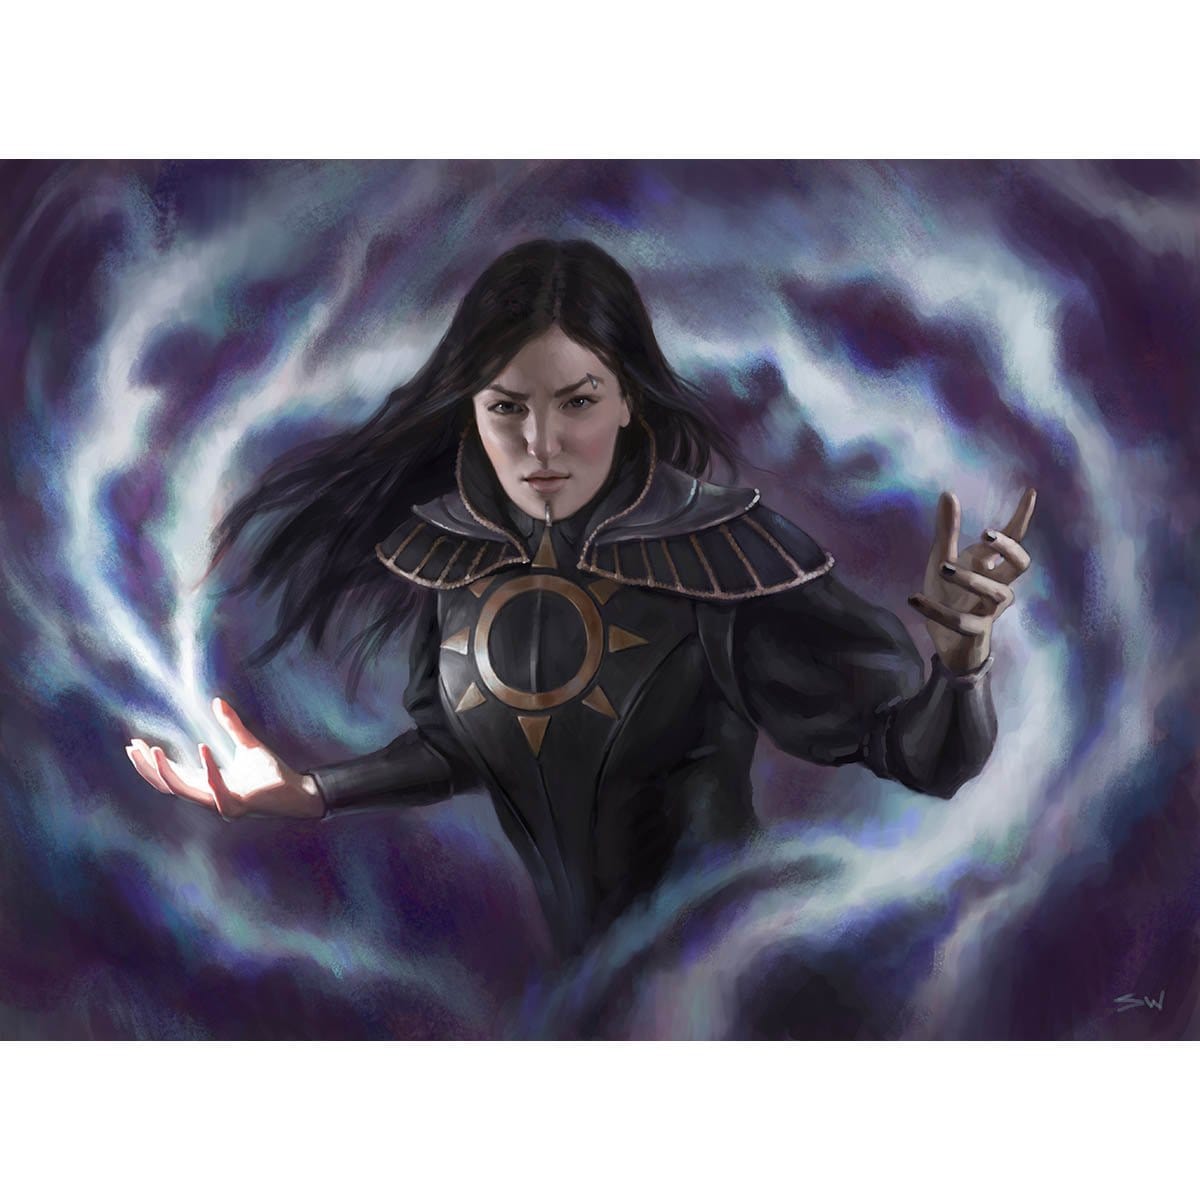 Teysa, Orzhov Scion Print - Print - Original Magic Art - Accessories for Magic the Gathering and other card games